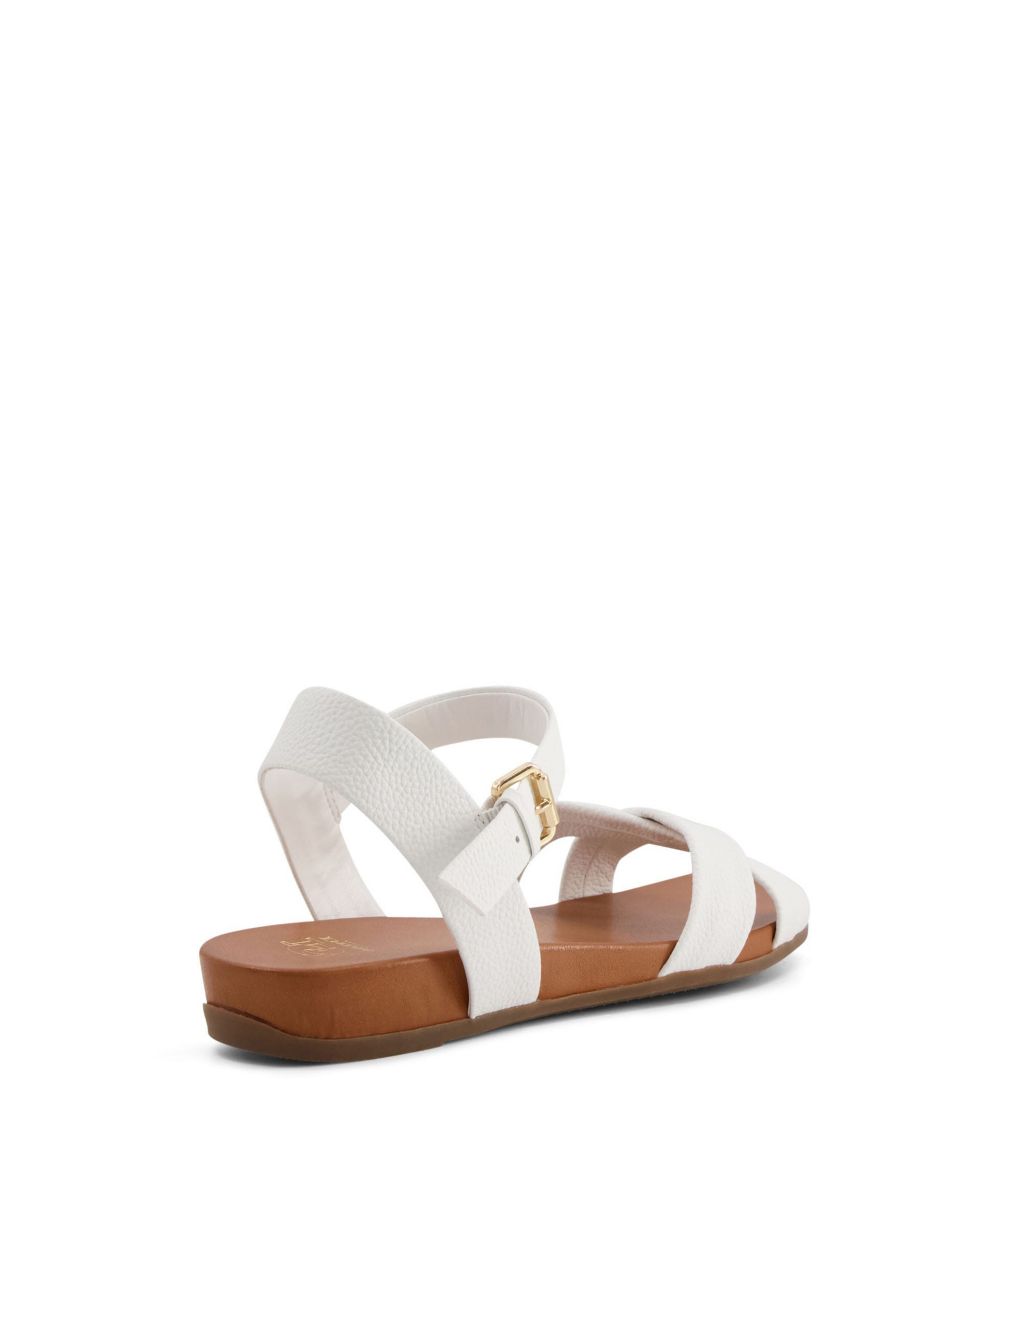 Leather Ankle Strap Wedge Sandals image 5